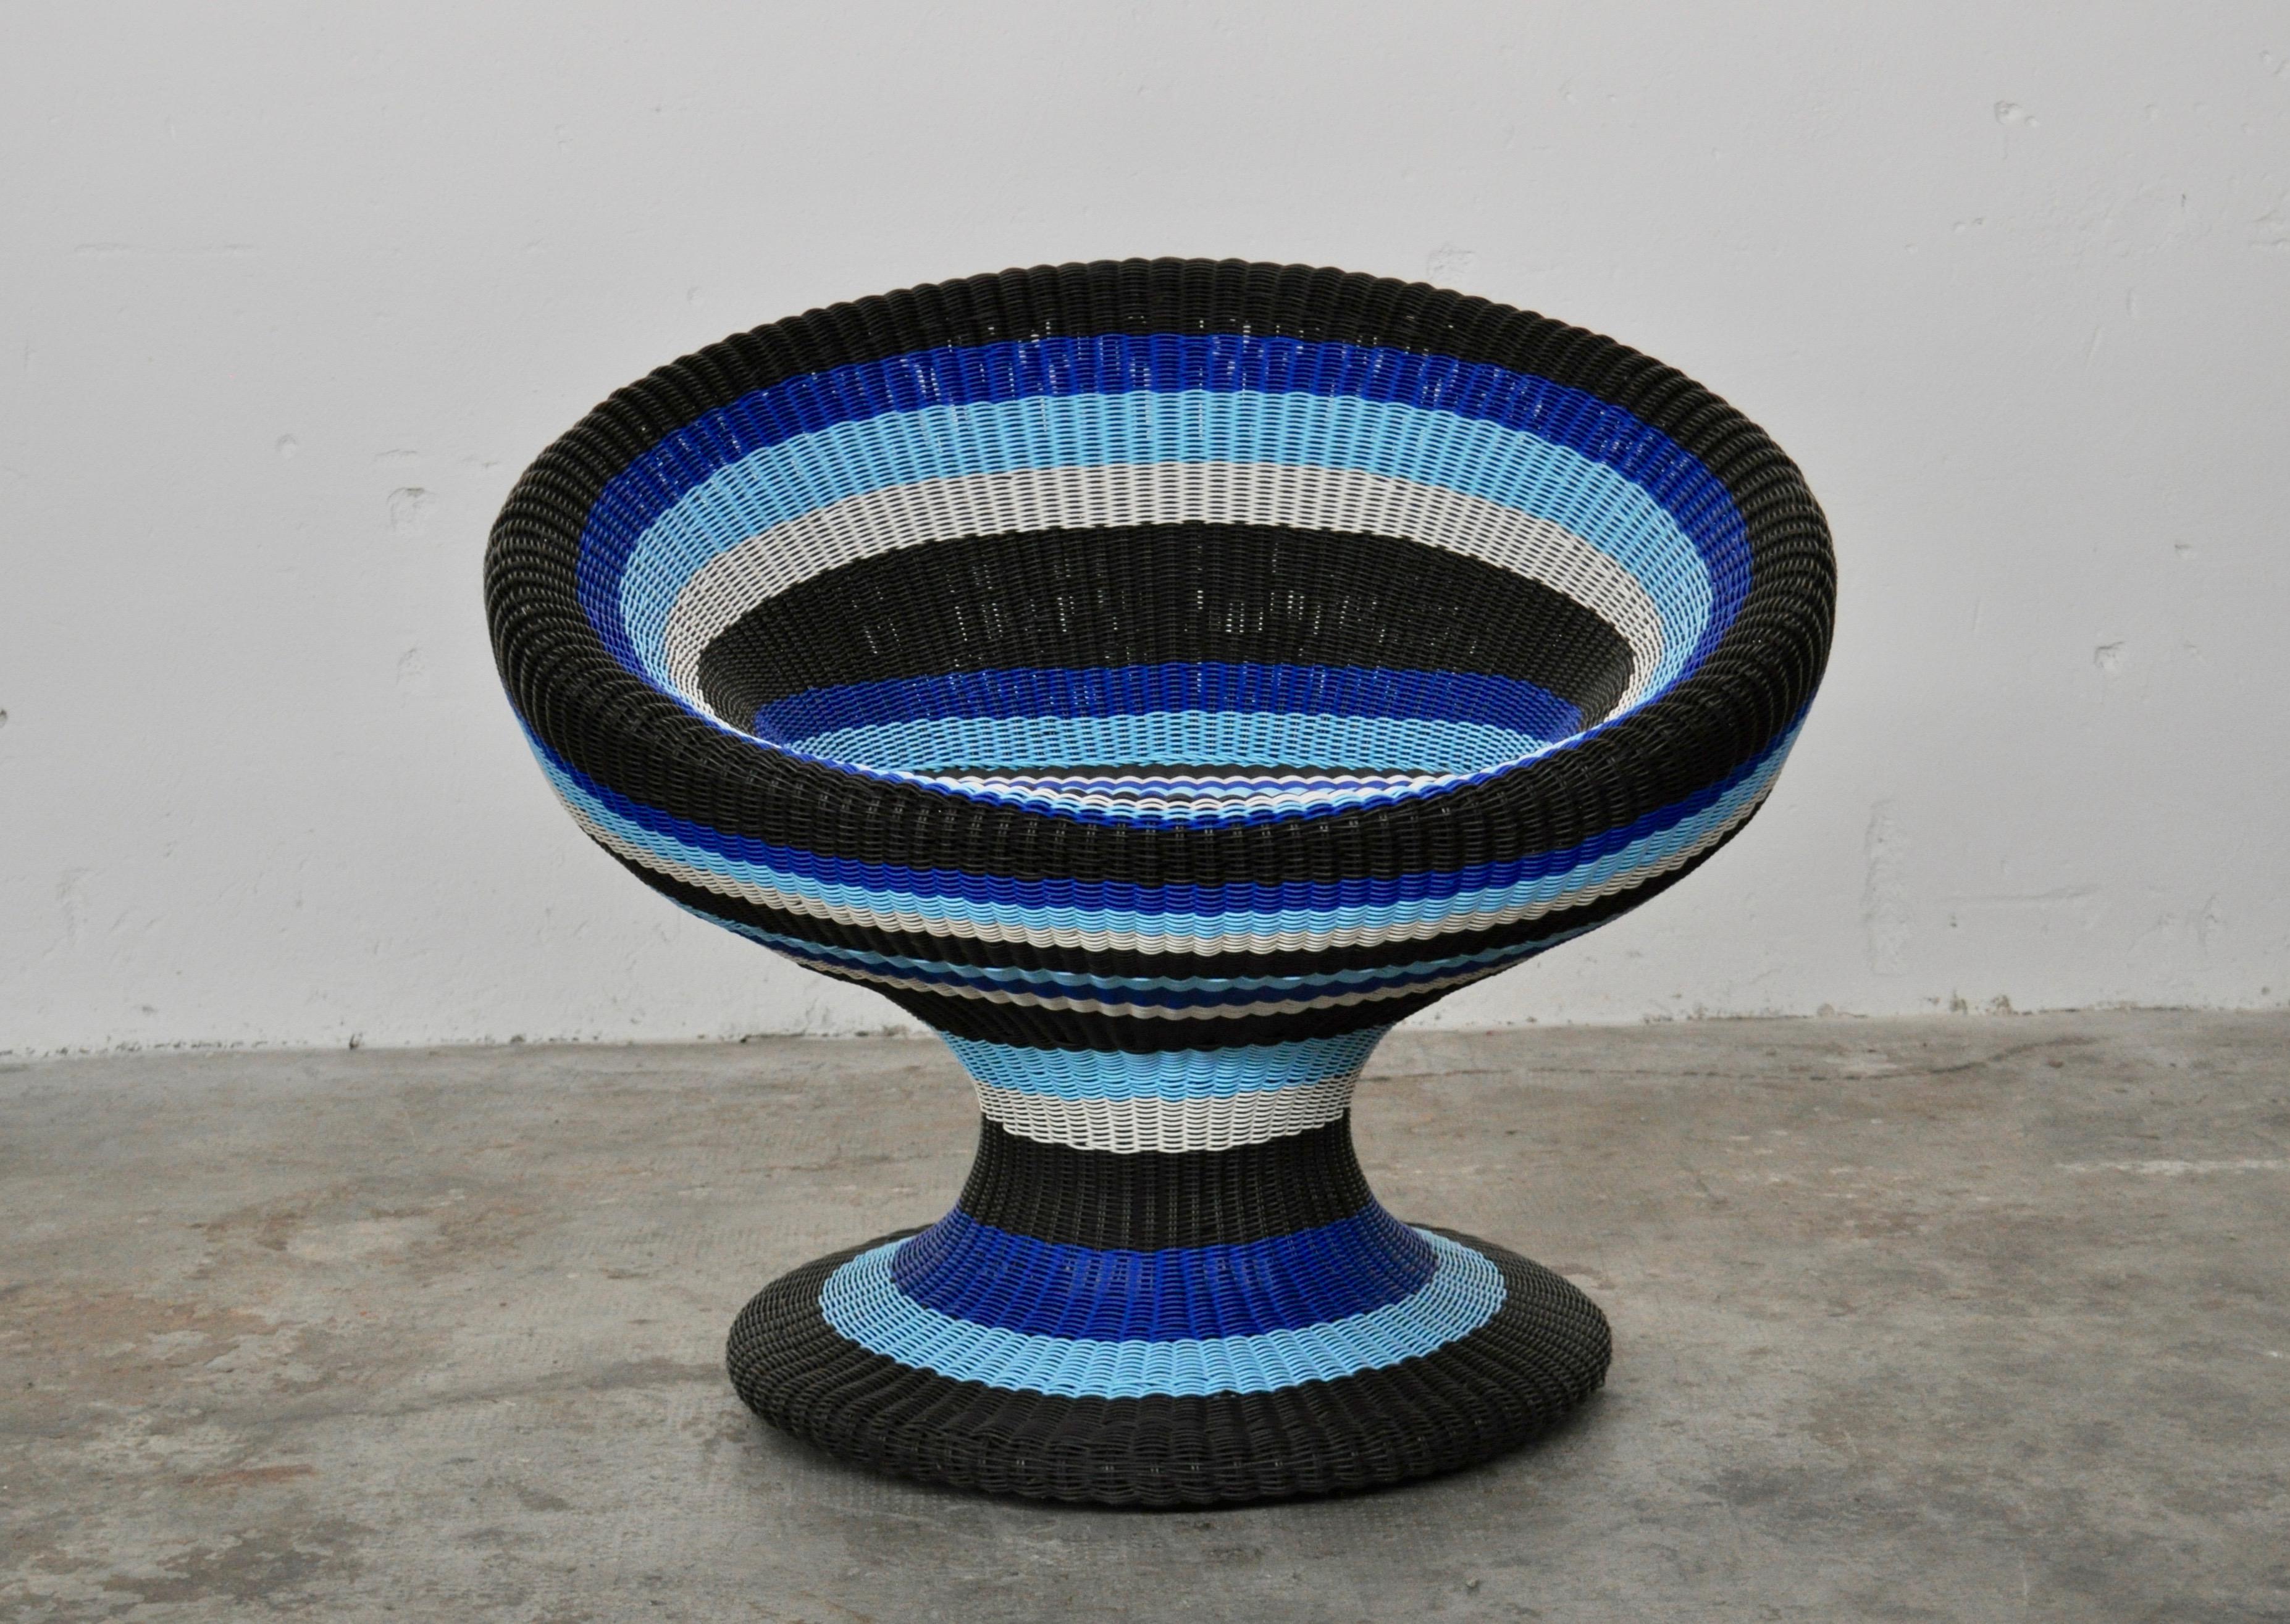 Outdoor lounge di Schoenuber e Franchi, in braided pvc threads, Italy, 2010. Different shades of blue. A splendid and decorative outdoor piece reminiscent of ceramic bowls.